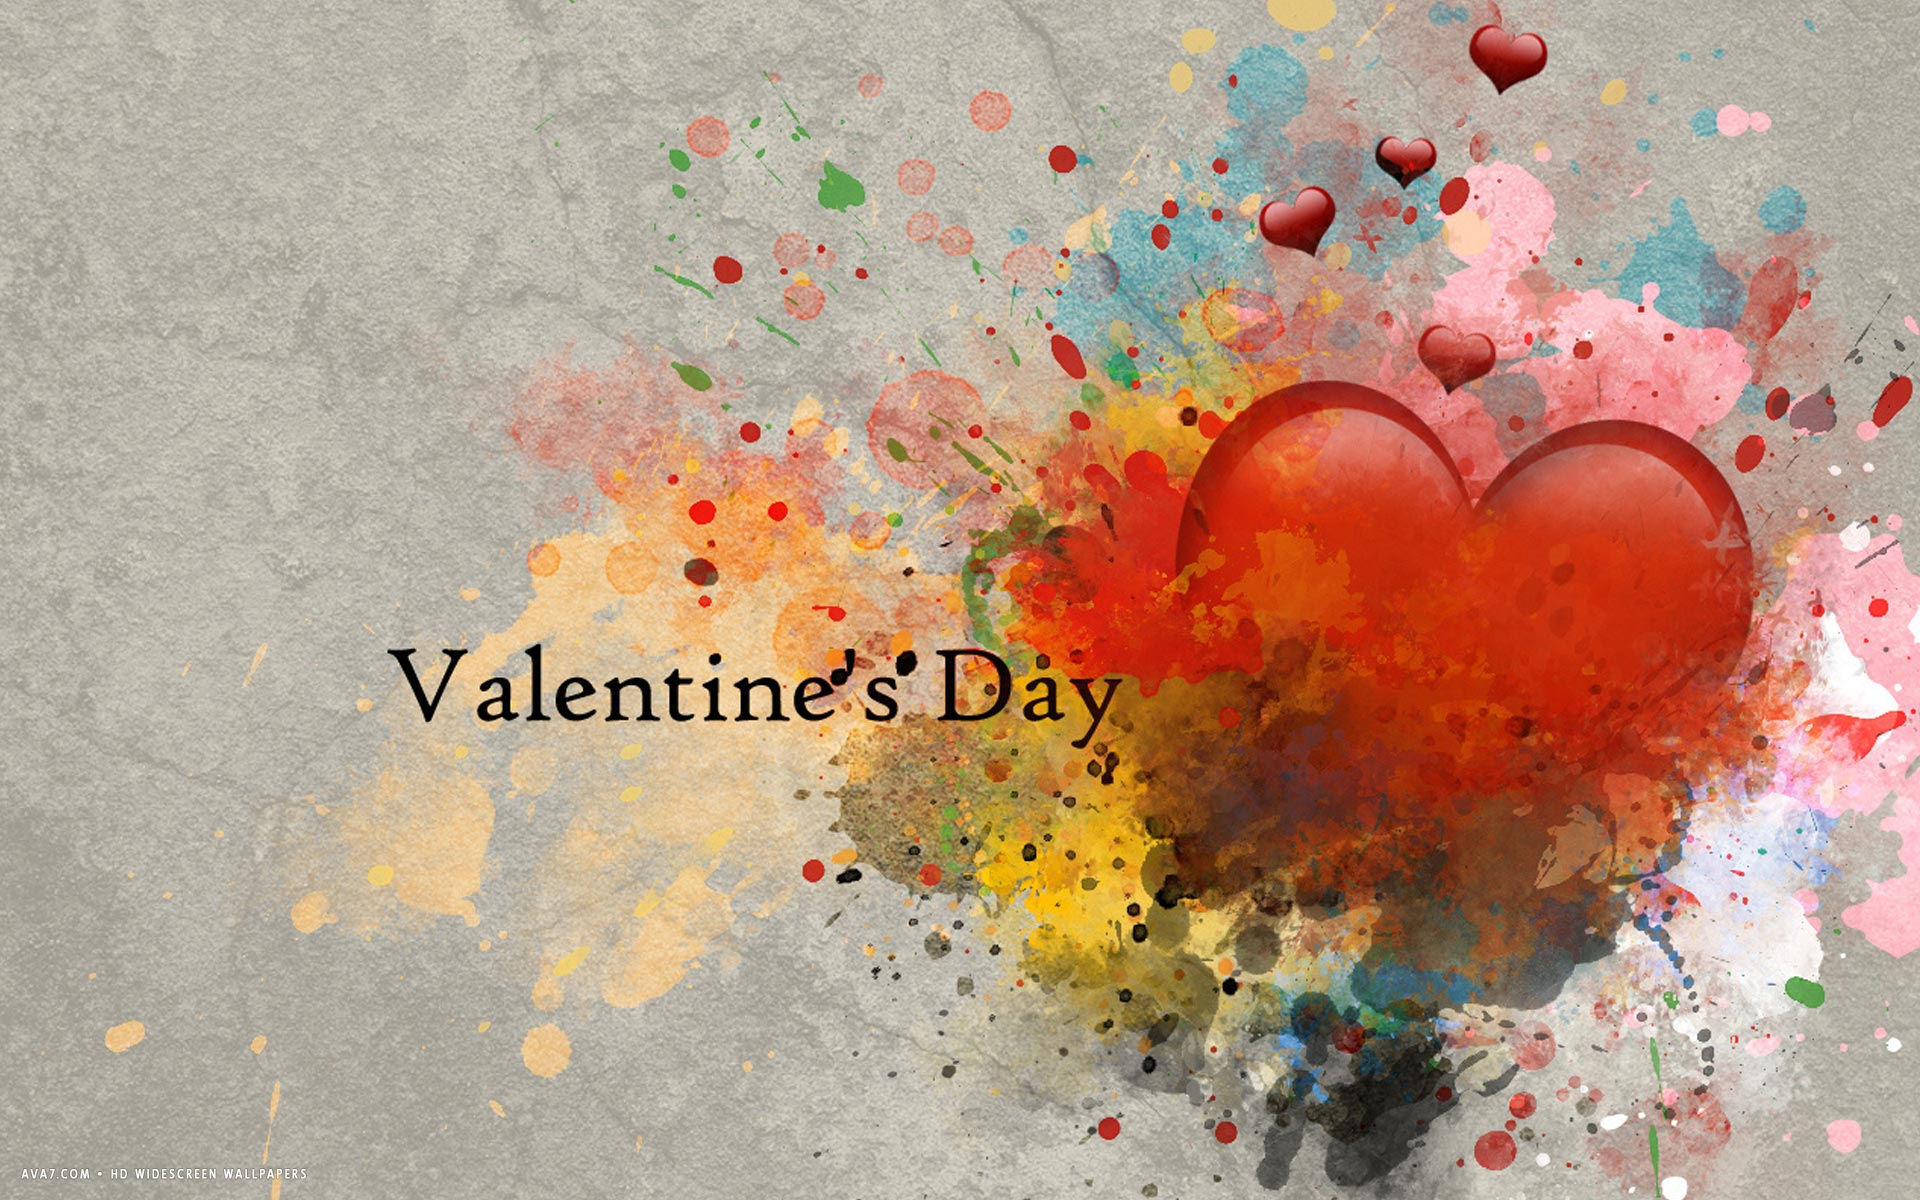 Valentines Day Red Heart Abstract Love Hd Widescreen - Painting For Valentines Day - HD Wallpaper 